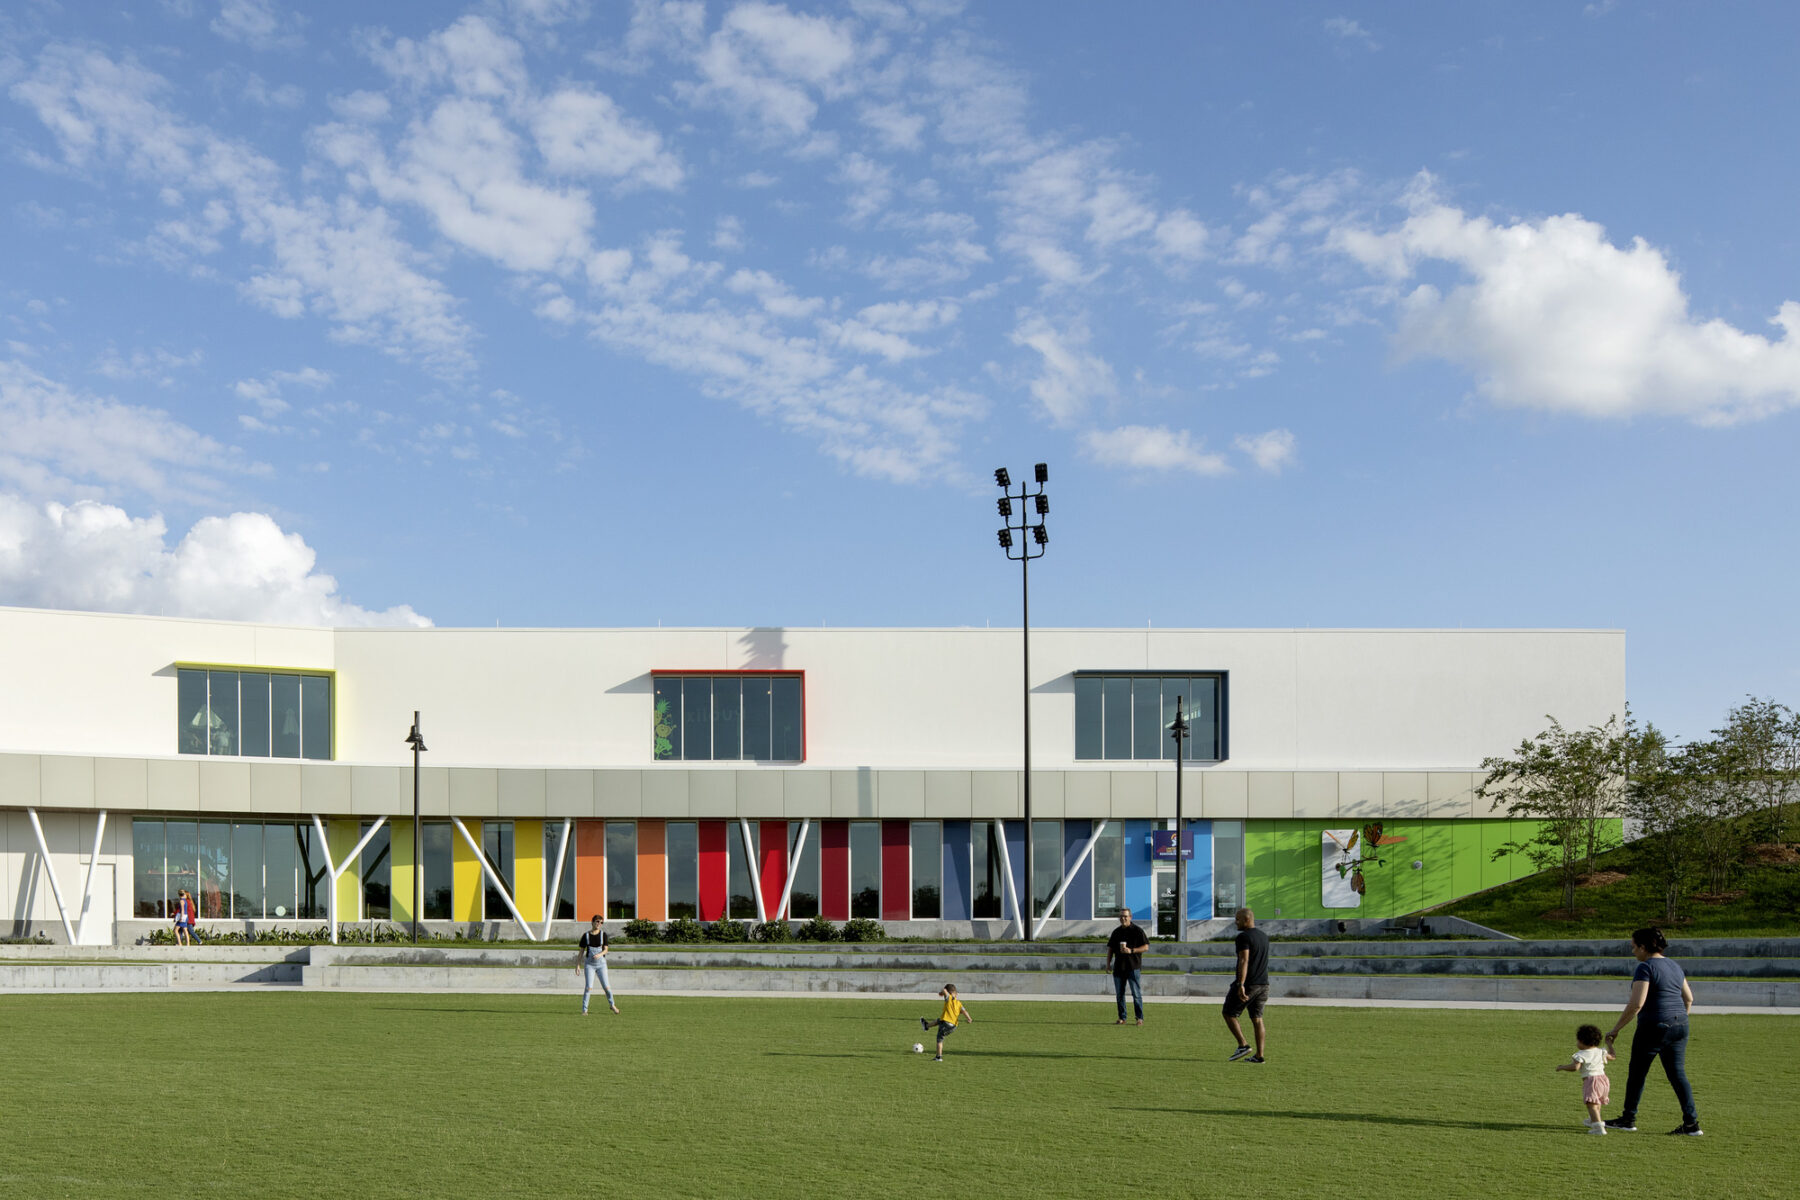 image of Children's Museum with family playing in front lawn, highlighting the pops of color across the facade